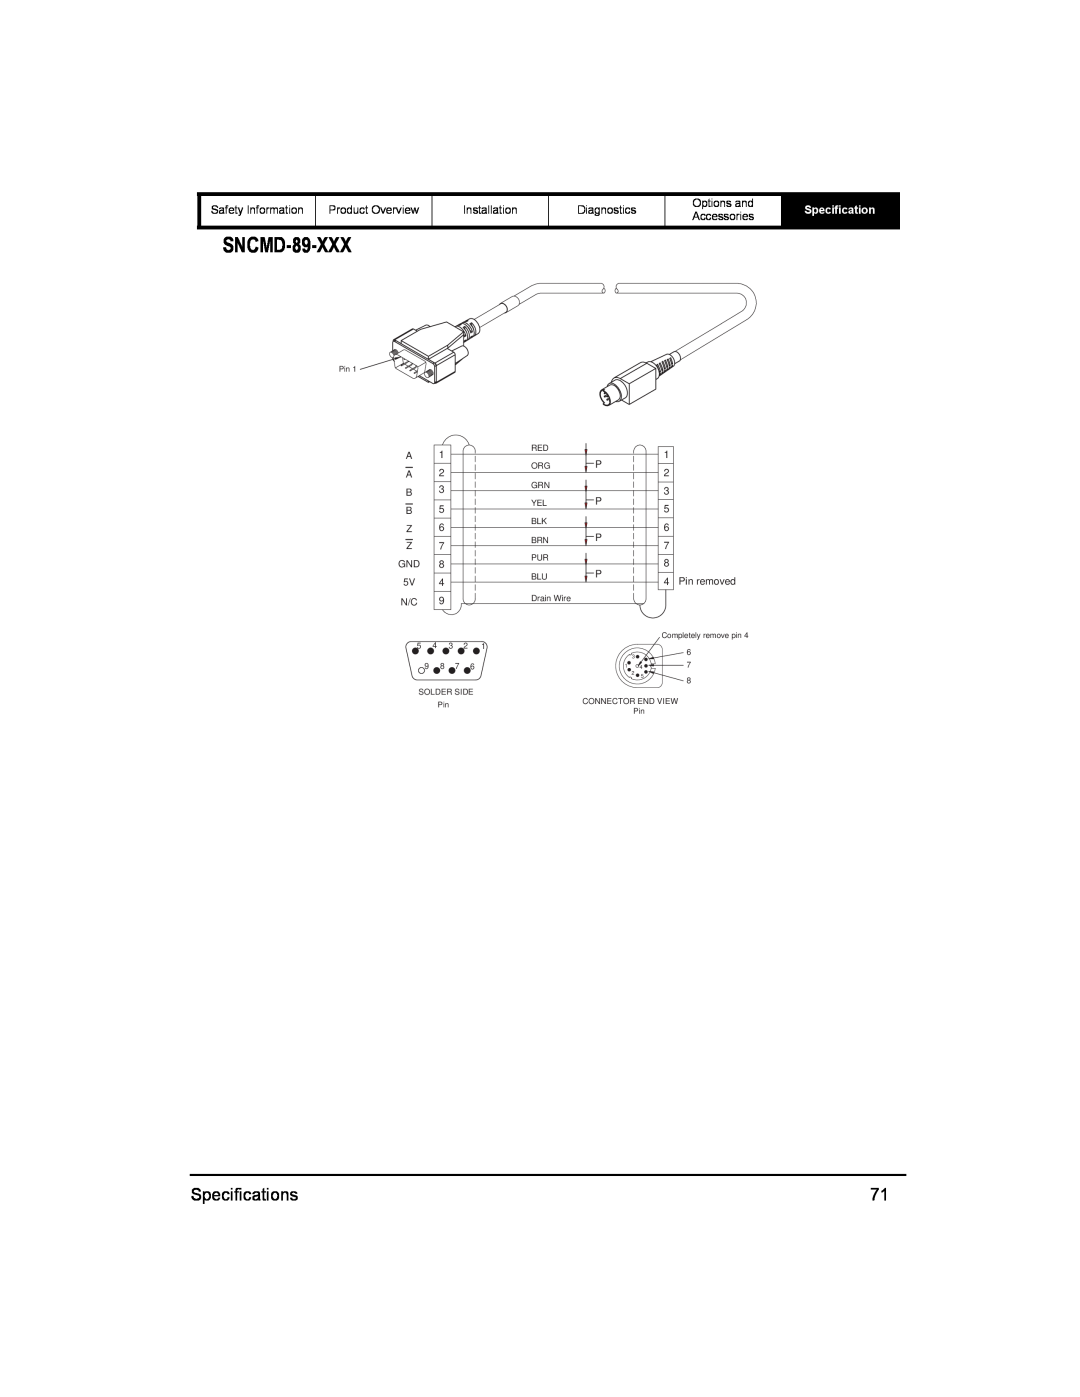 Emerson 400518-01 installation manual SNCMD-89-XXX, Specifications 